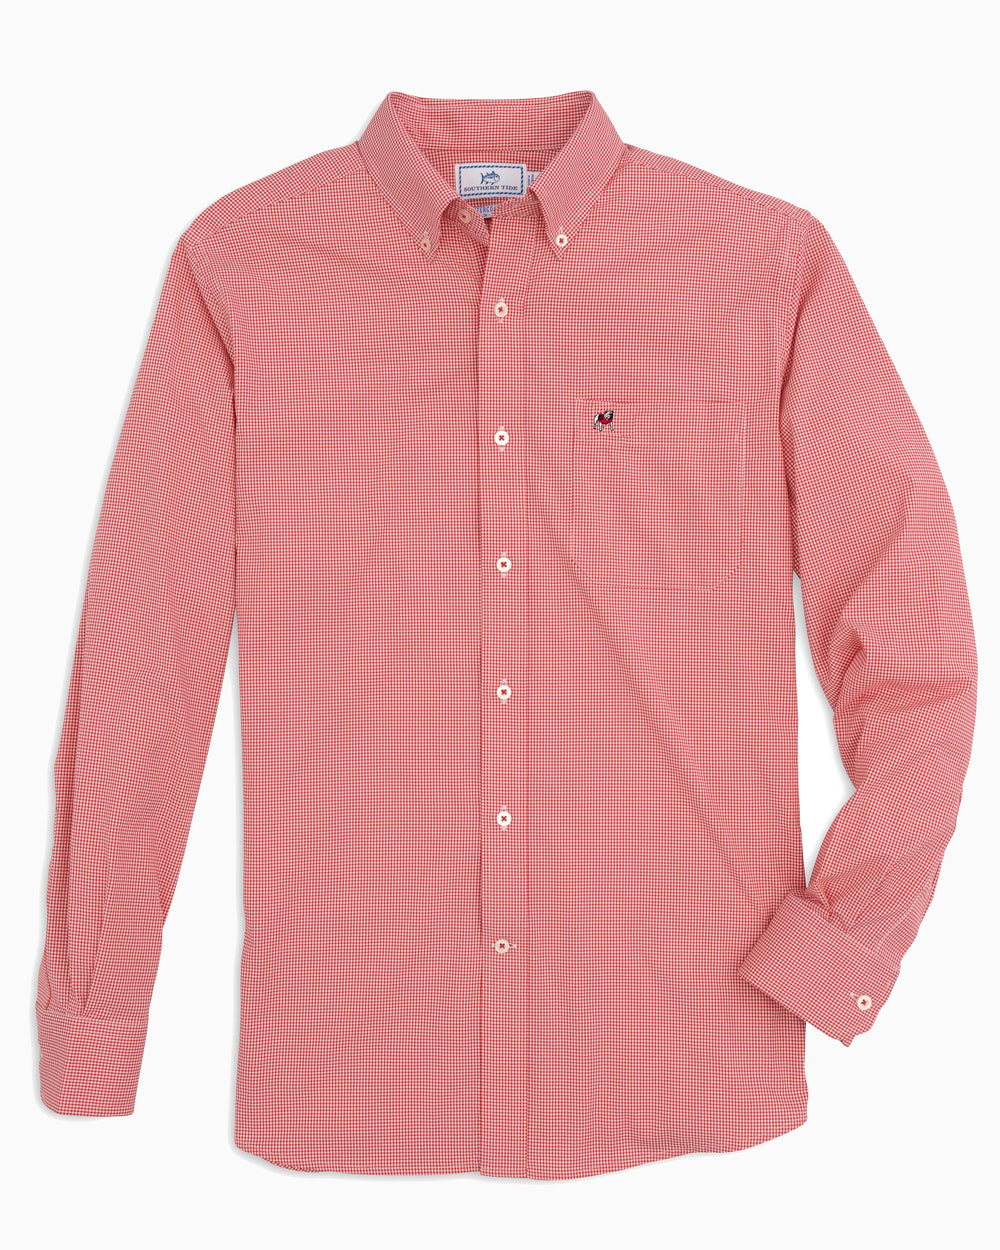 The front view of the Men's Red Georgia Bulldogs Gingham Button Down Shirt by Southern Tide - Varsity Red